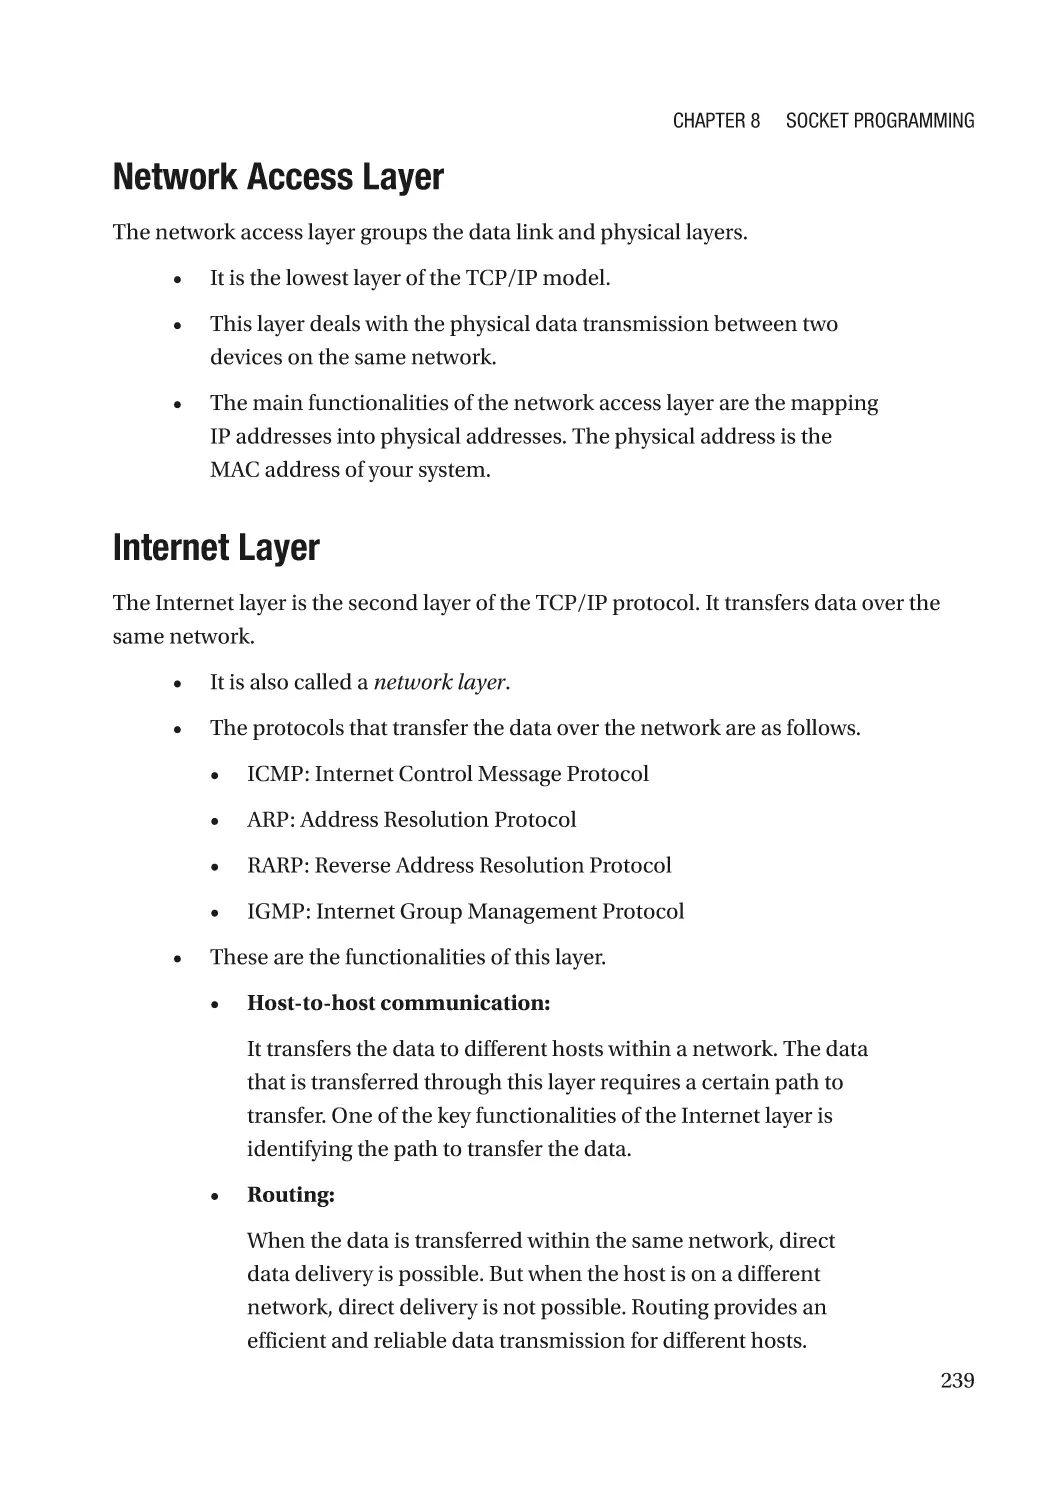 Network Access Layer
Internet Layer